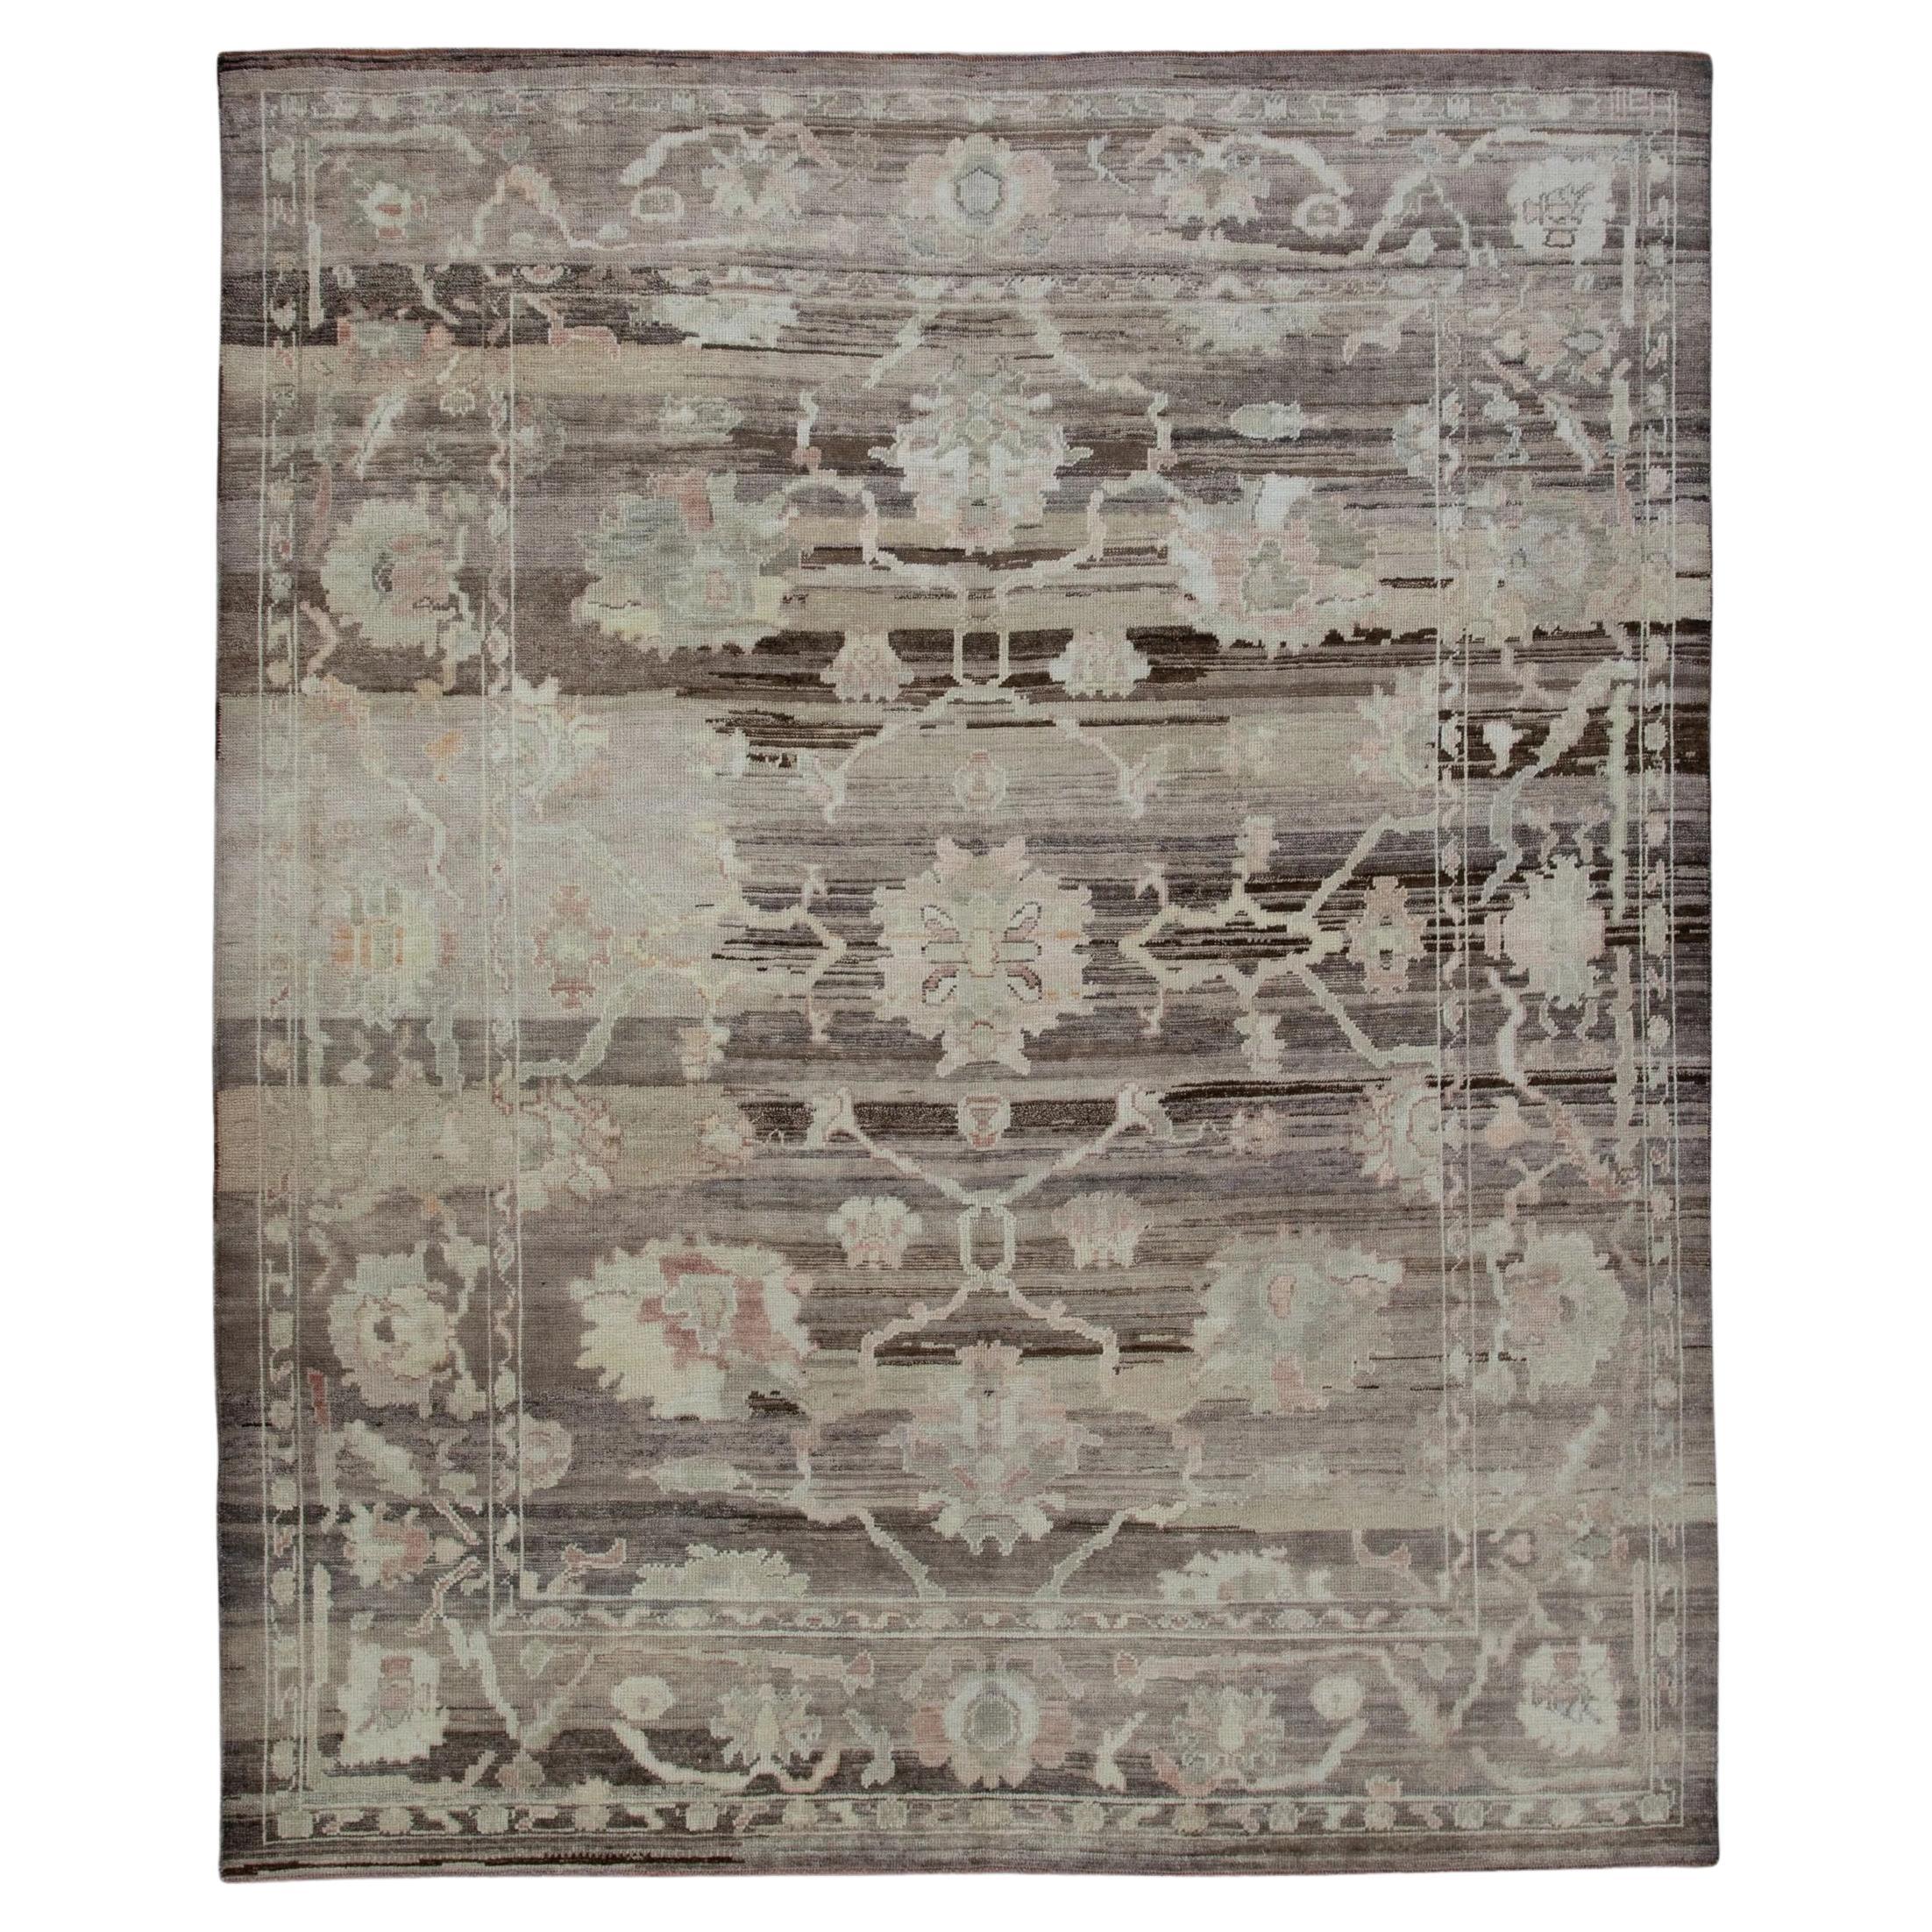 Brown Floral Old Wool Turkish Oushak Rug Handwoven from Reclaimed Vintage Wool